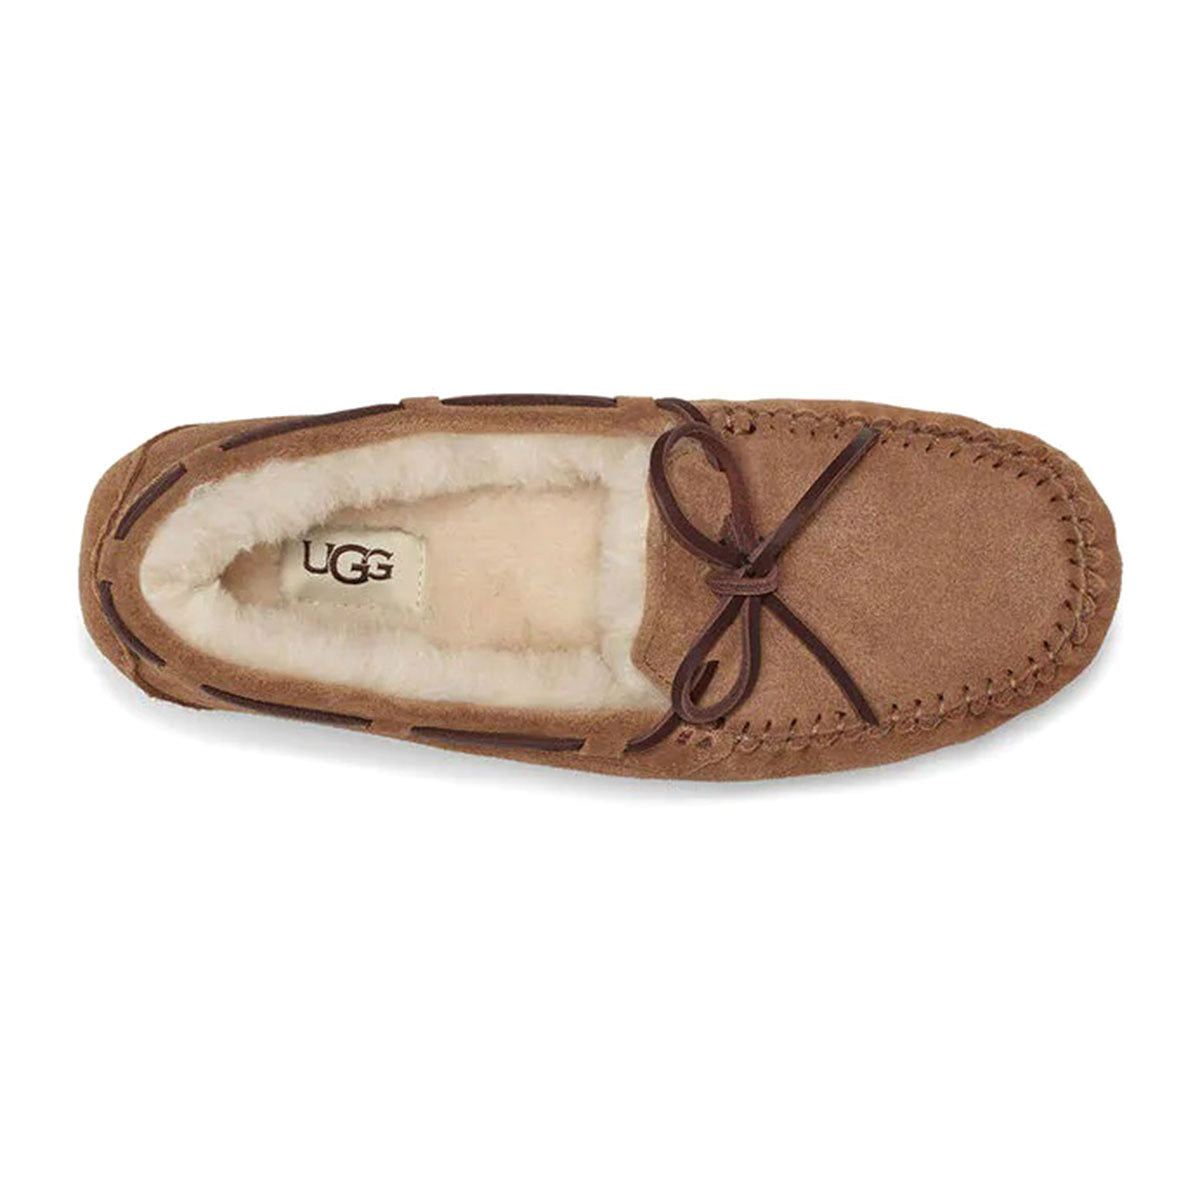 A single brown UGG Dakota Chestnut moccasin-inspired slipper with shearling lining displayed on a white background.